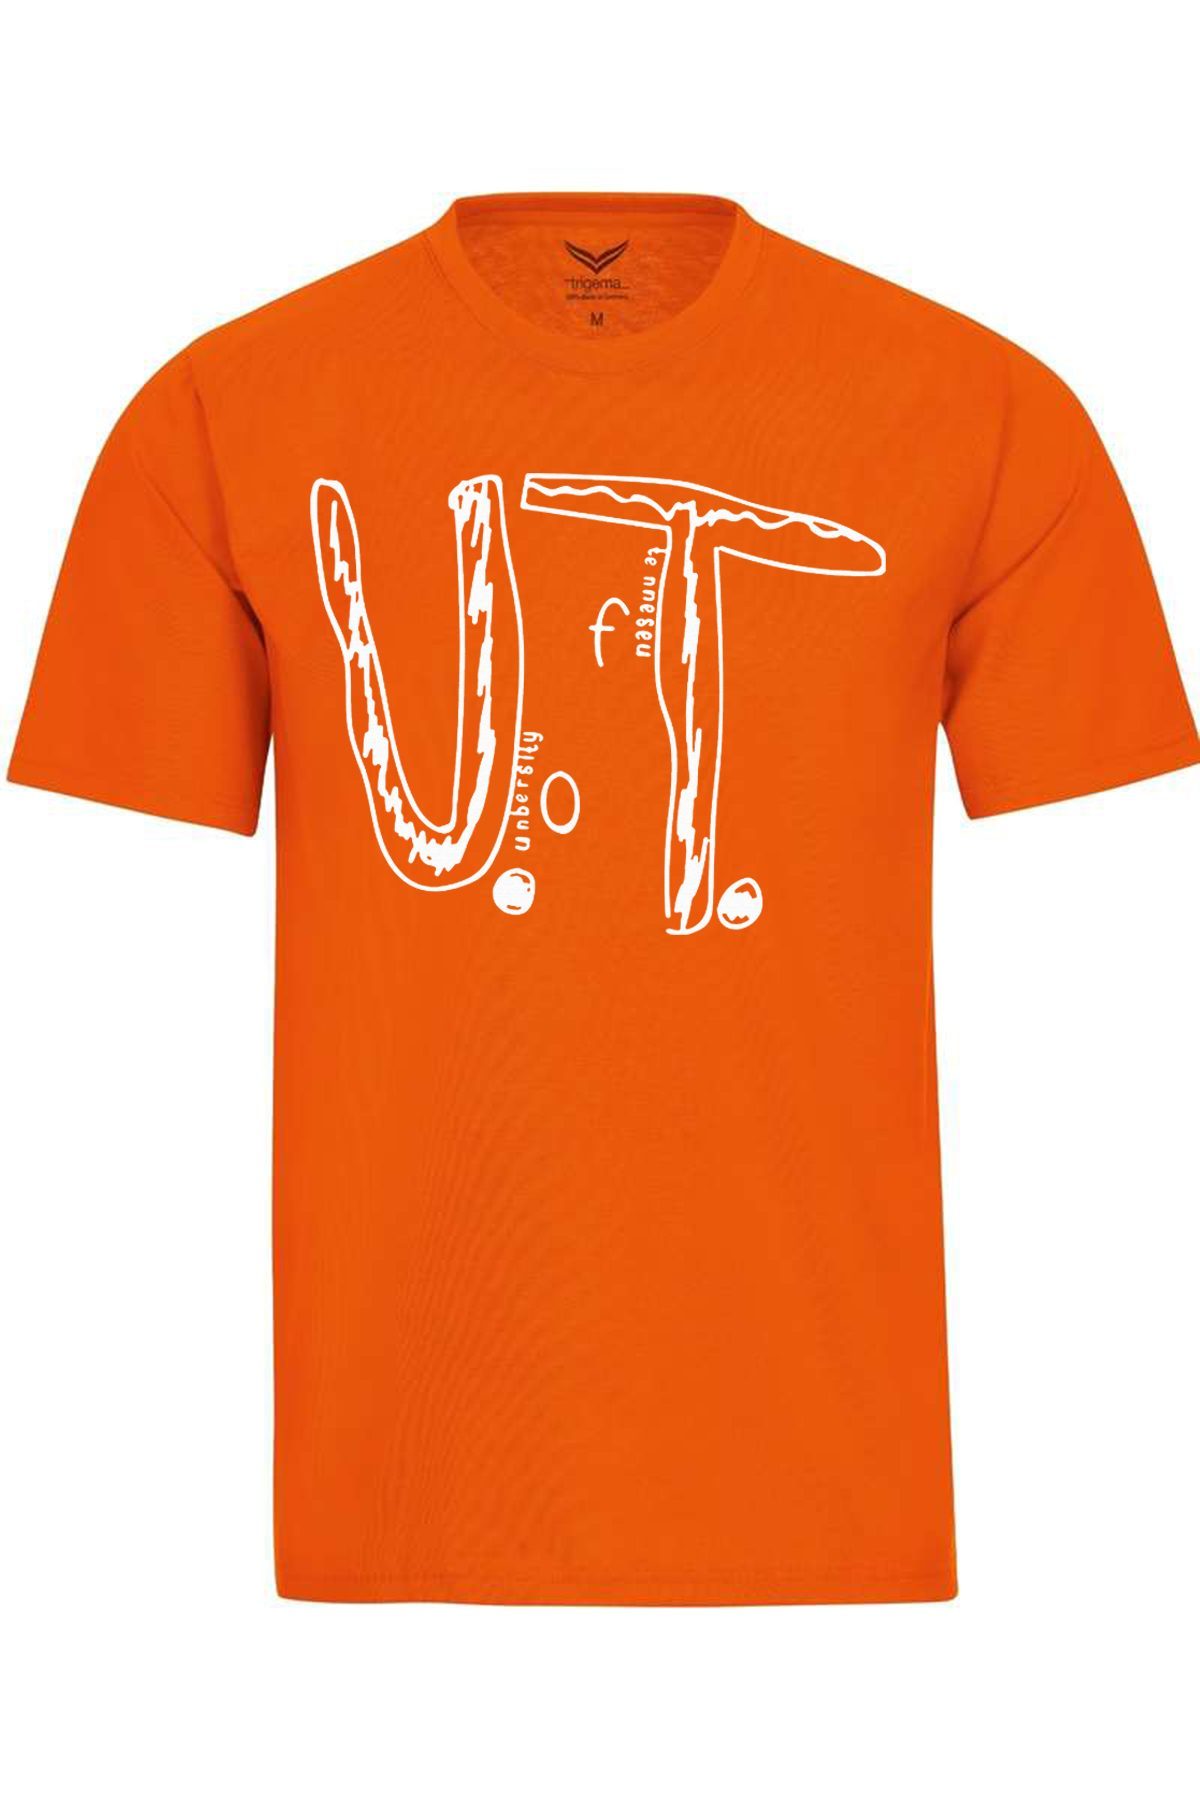 university-tennessee-official-t-shirt-for-mens-womens-kids-orderquilt